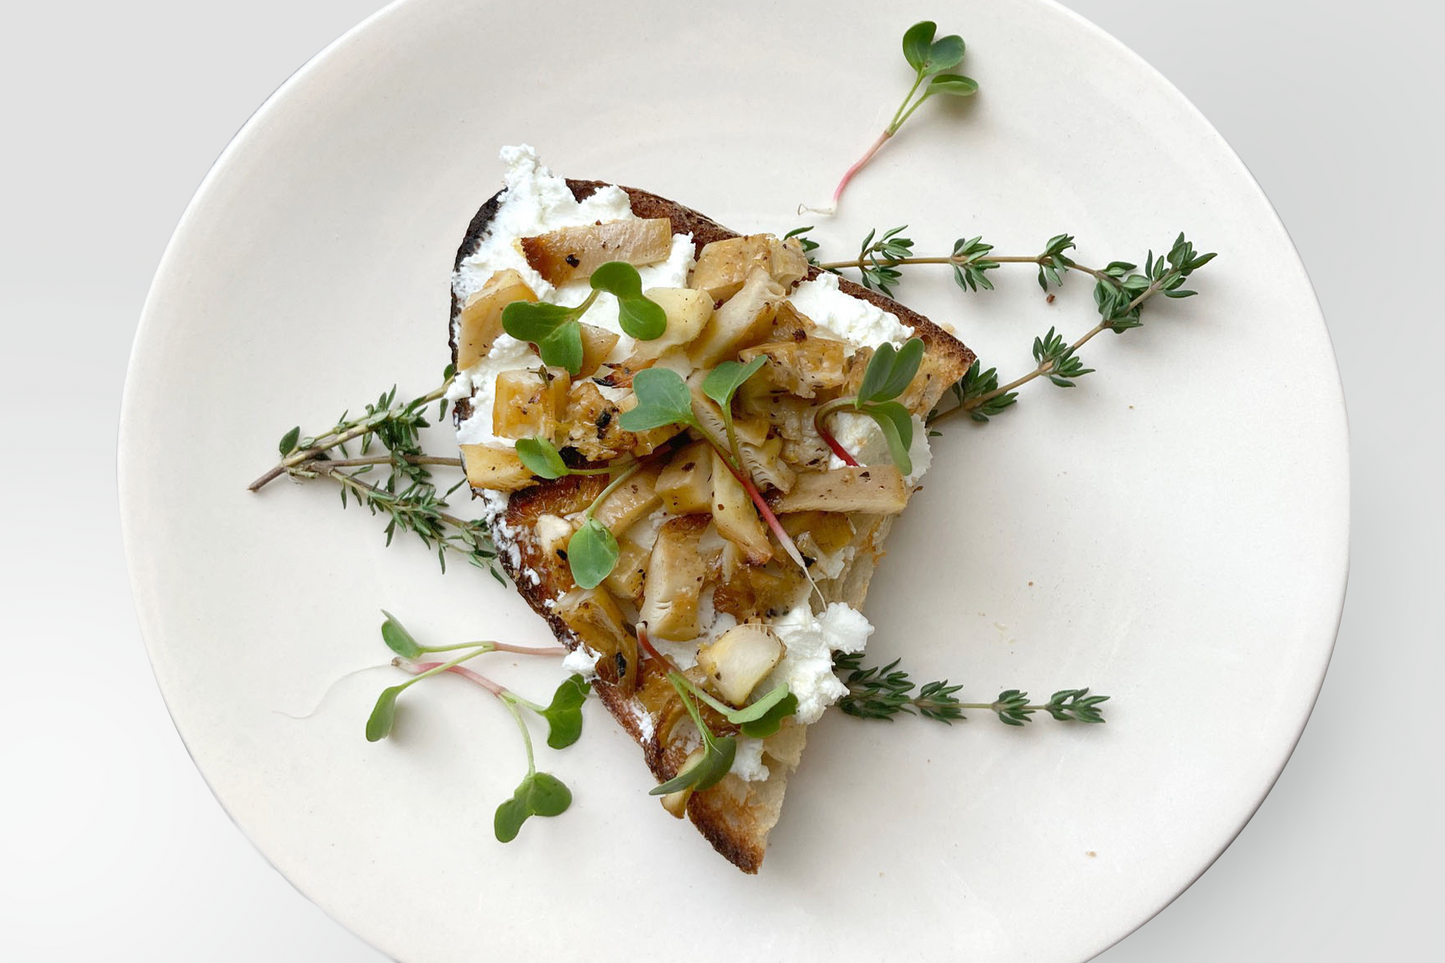 Marinated oyster mushrooms with goat cheese on sourdough toast